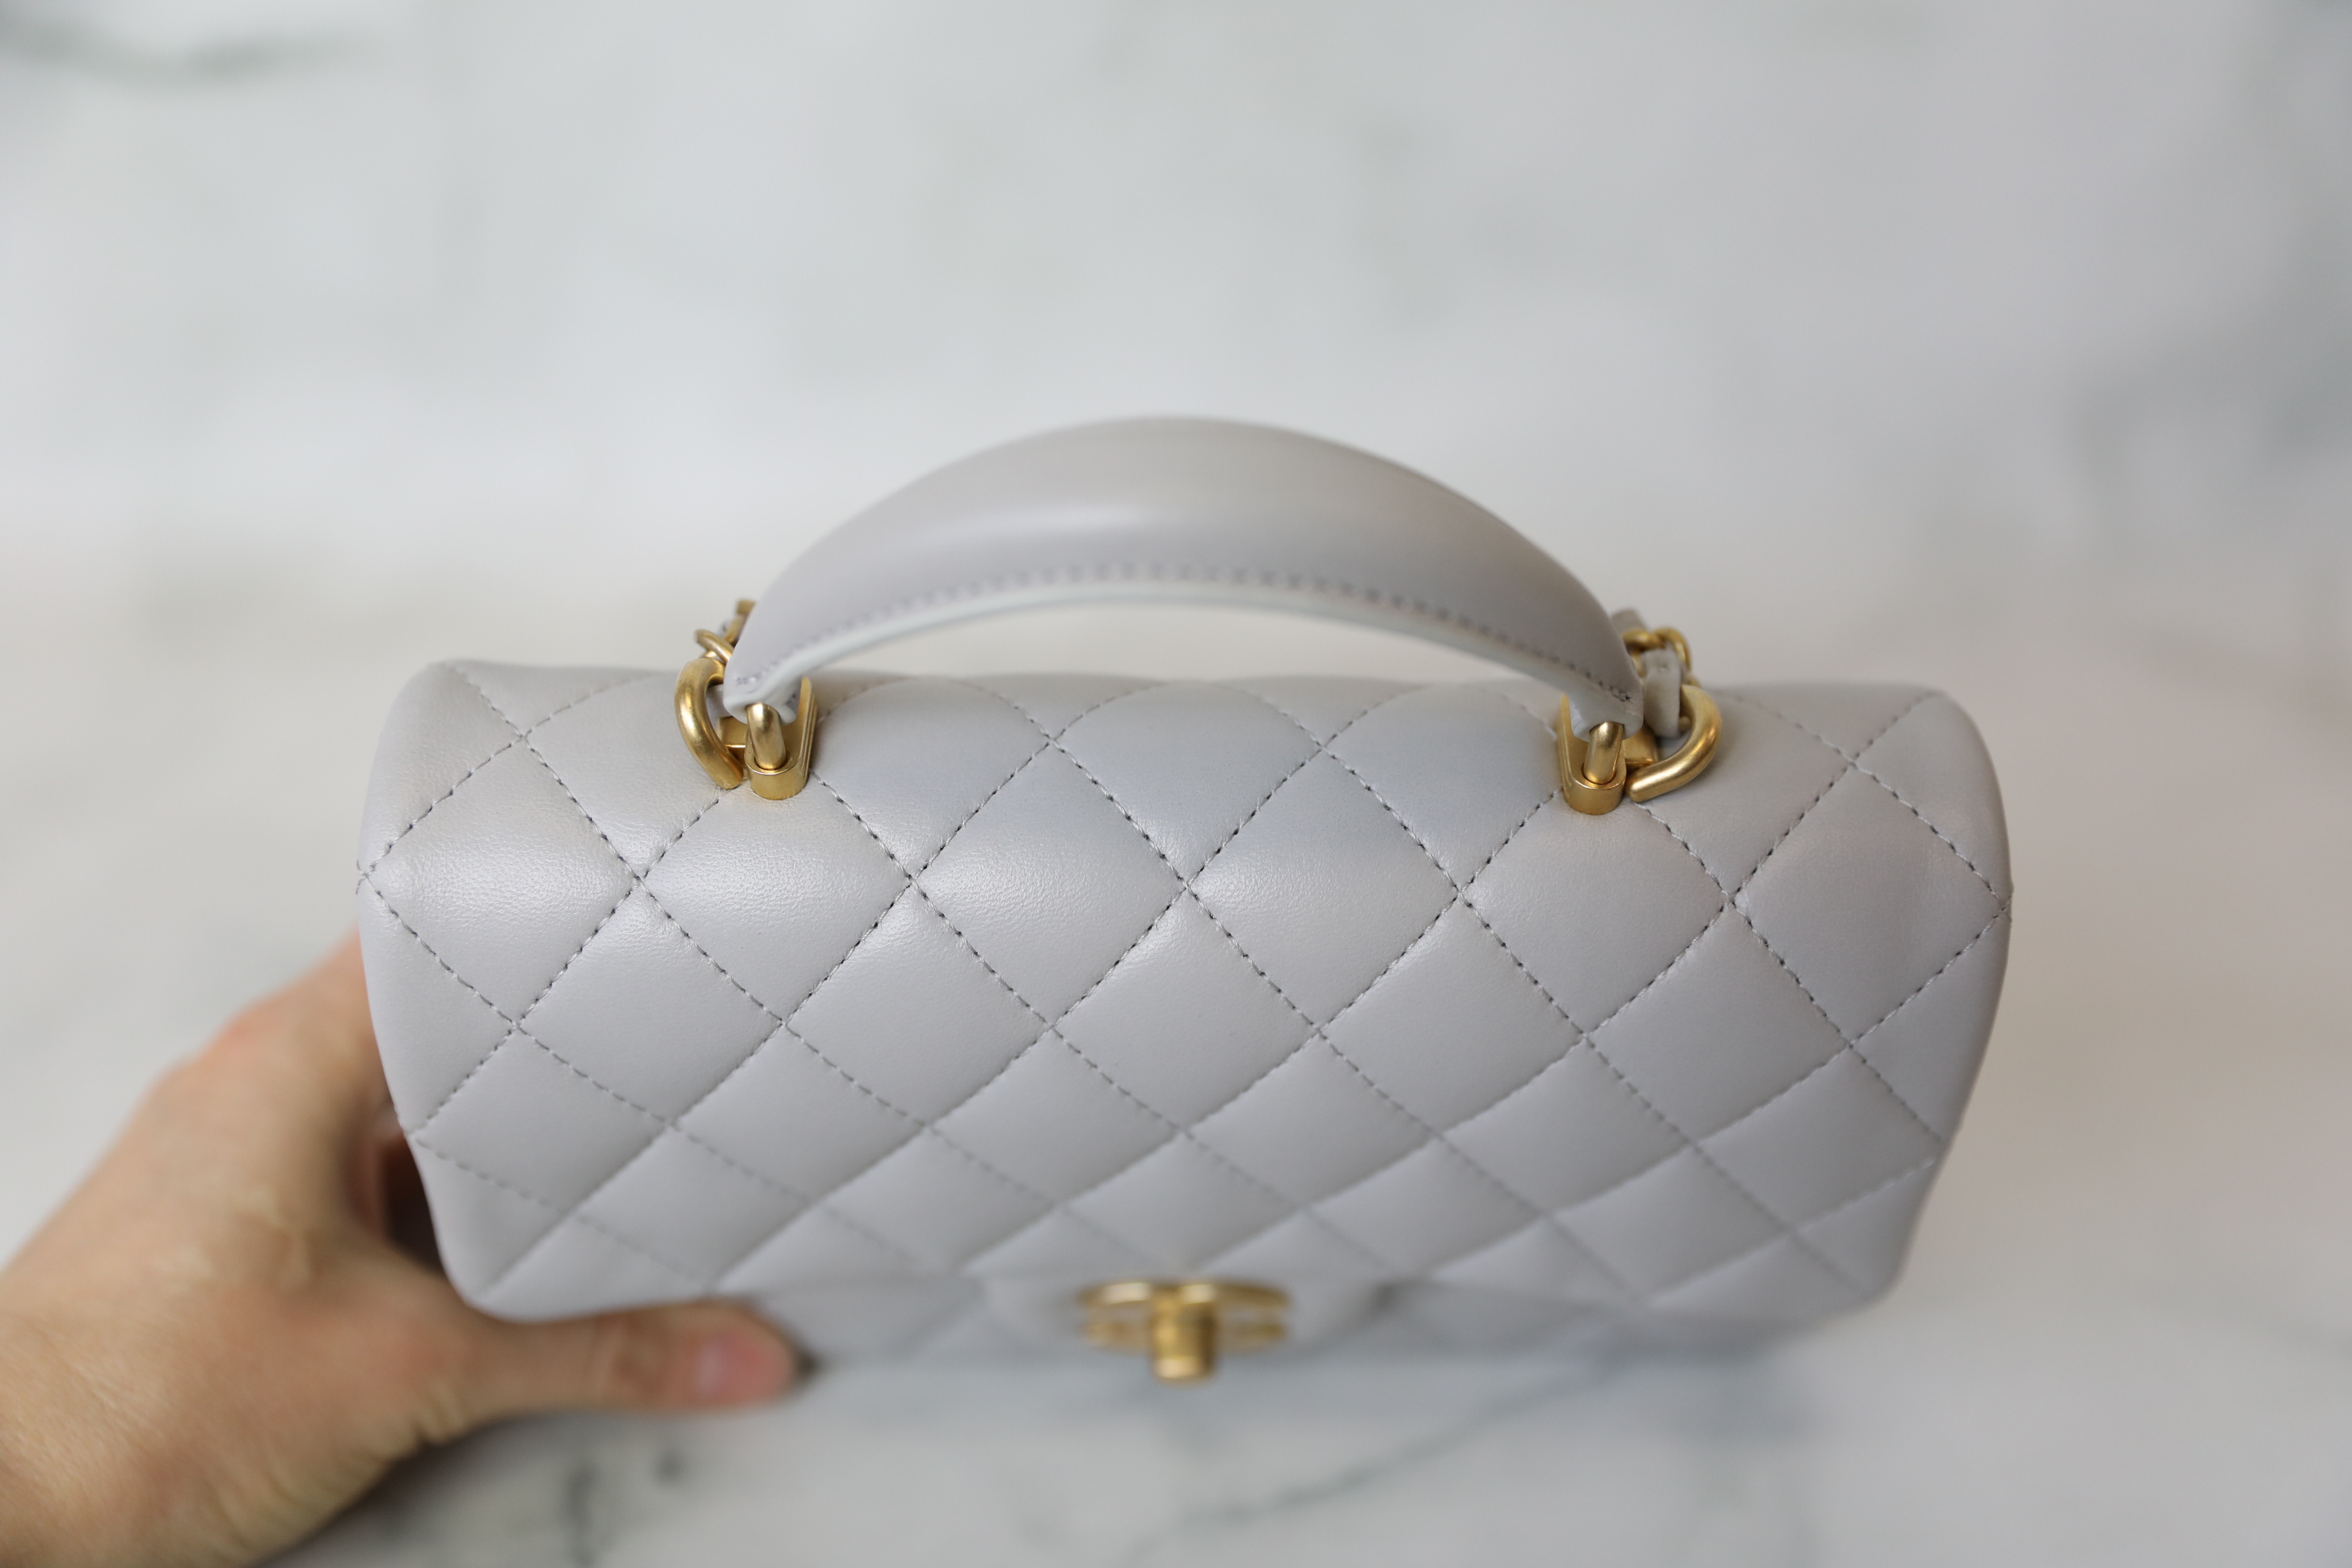 Chanel Mini Rectangular with Top Handle, Grey Lambskin with Gold